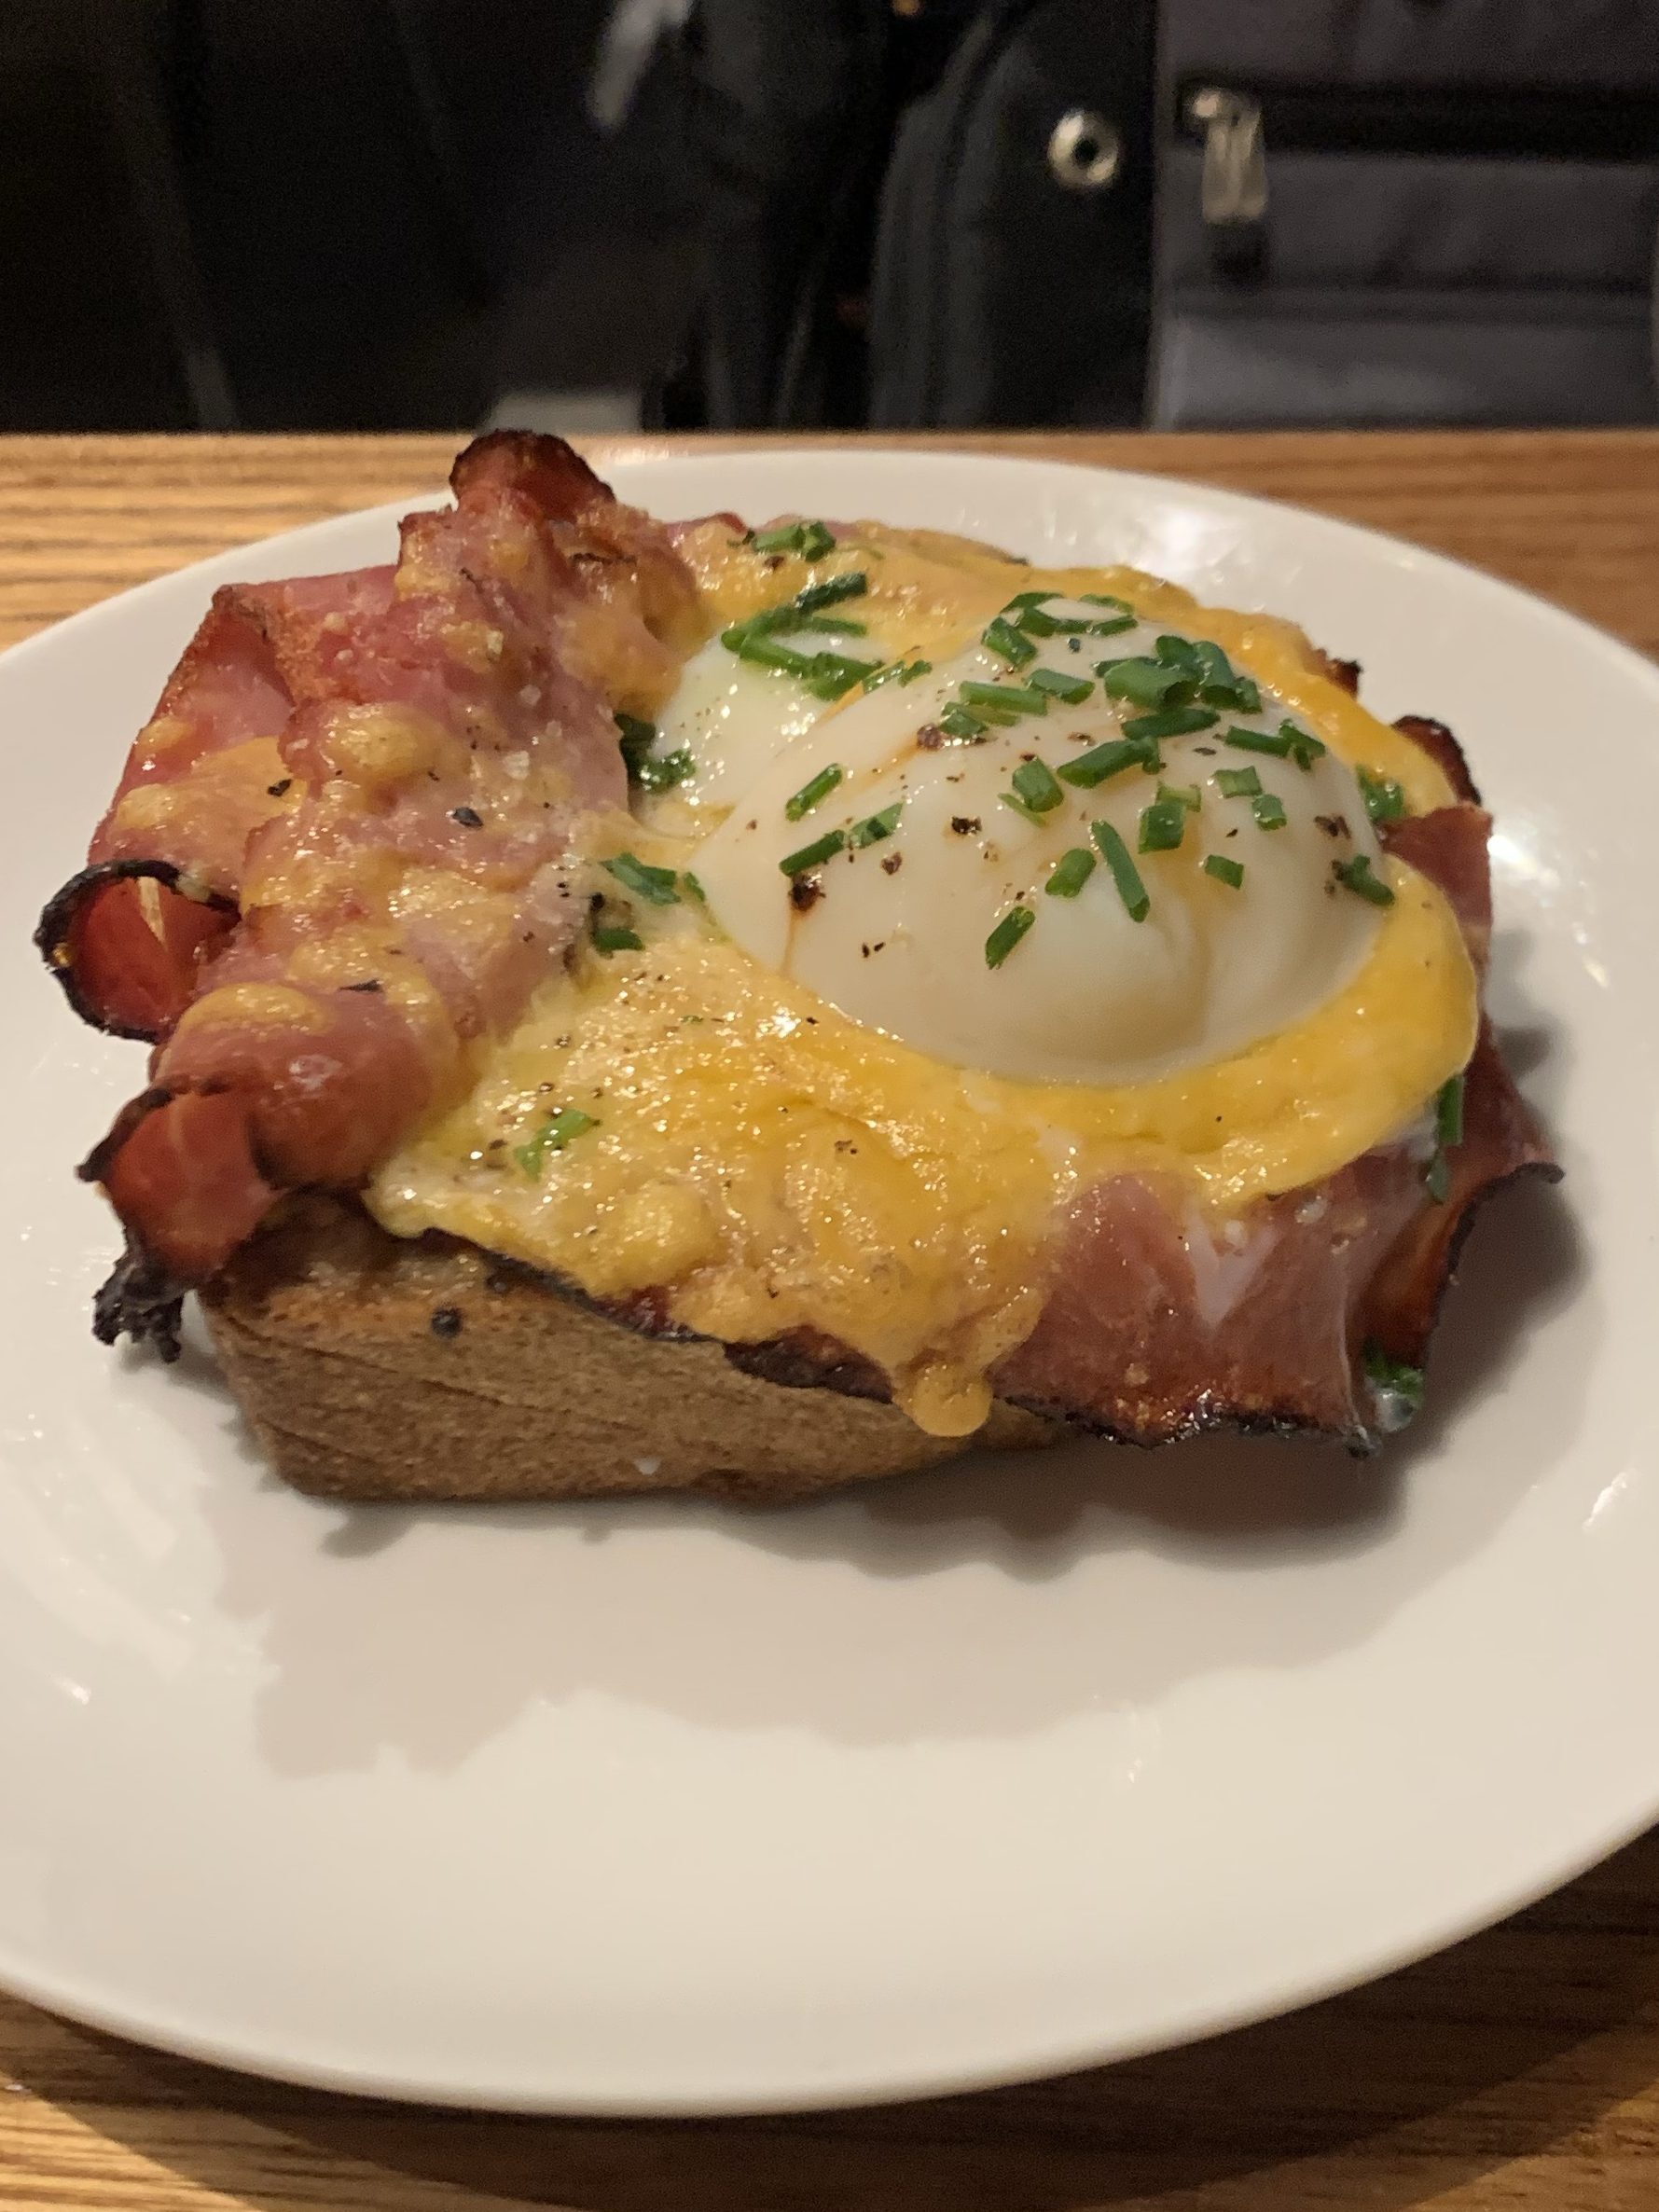 Egg held firm to bacon with a lot of cheese, on toast